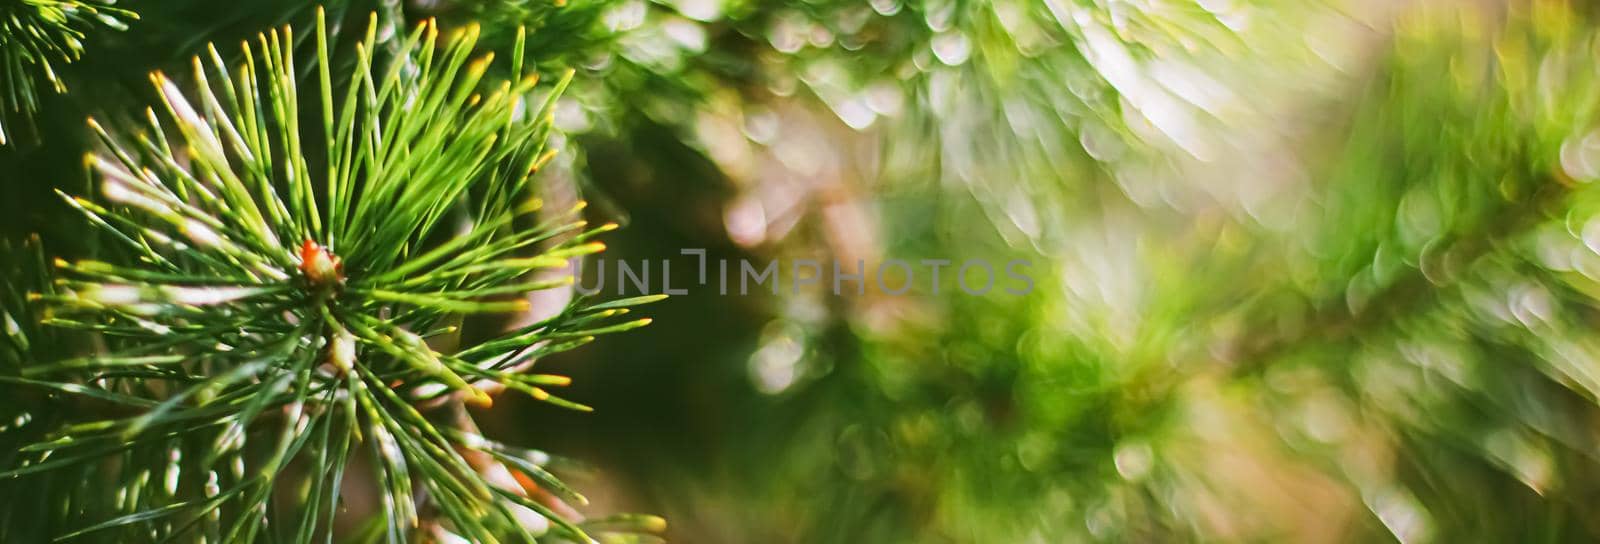 Spruce tree branches as abstract nature background and natural environment concept